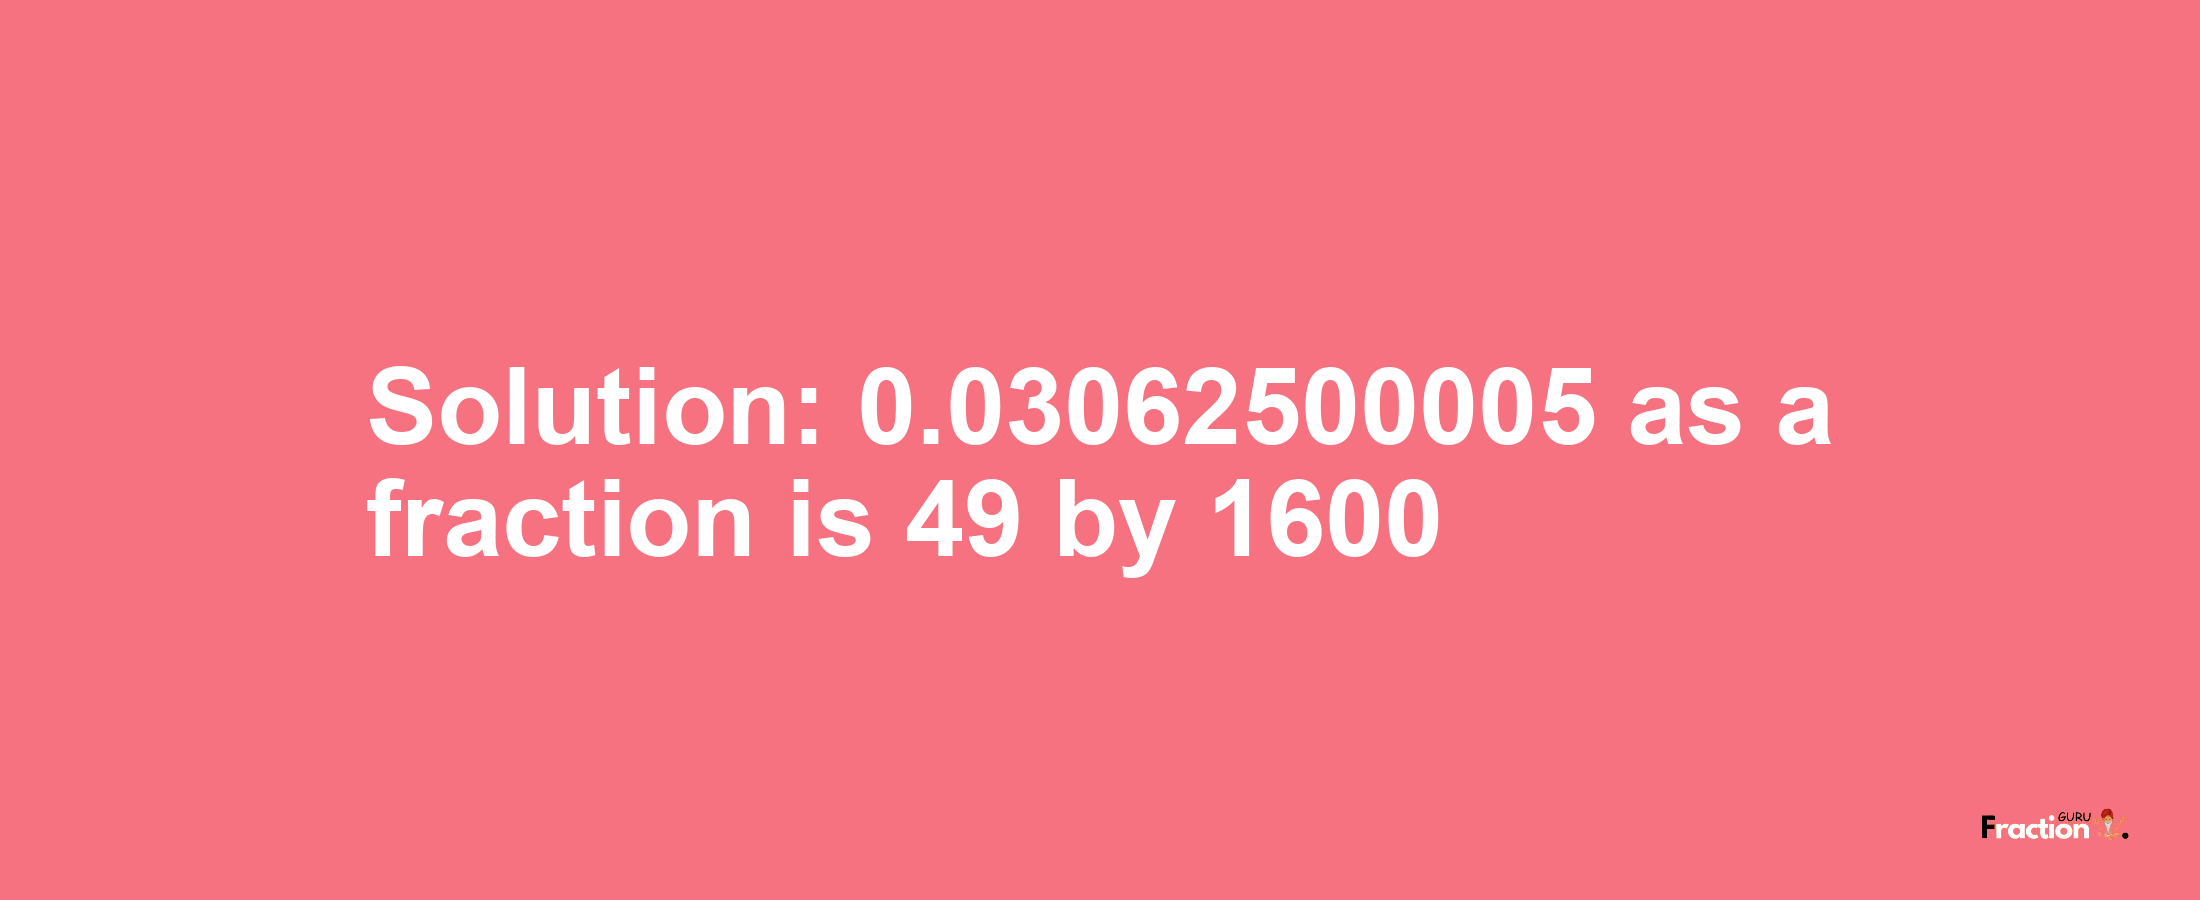 Solution:0.03062500005 as a fraction is 49/1600